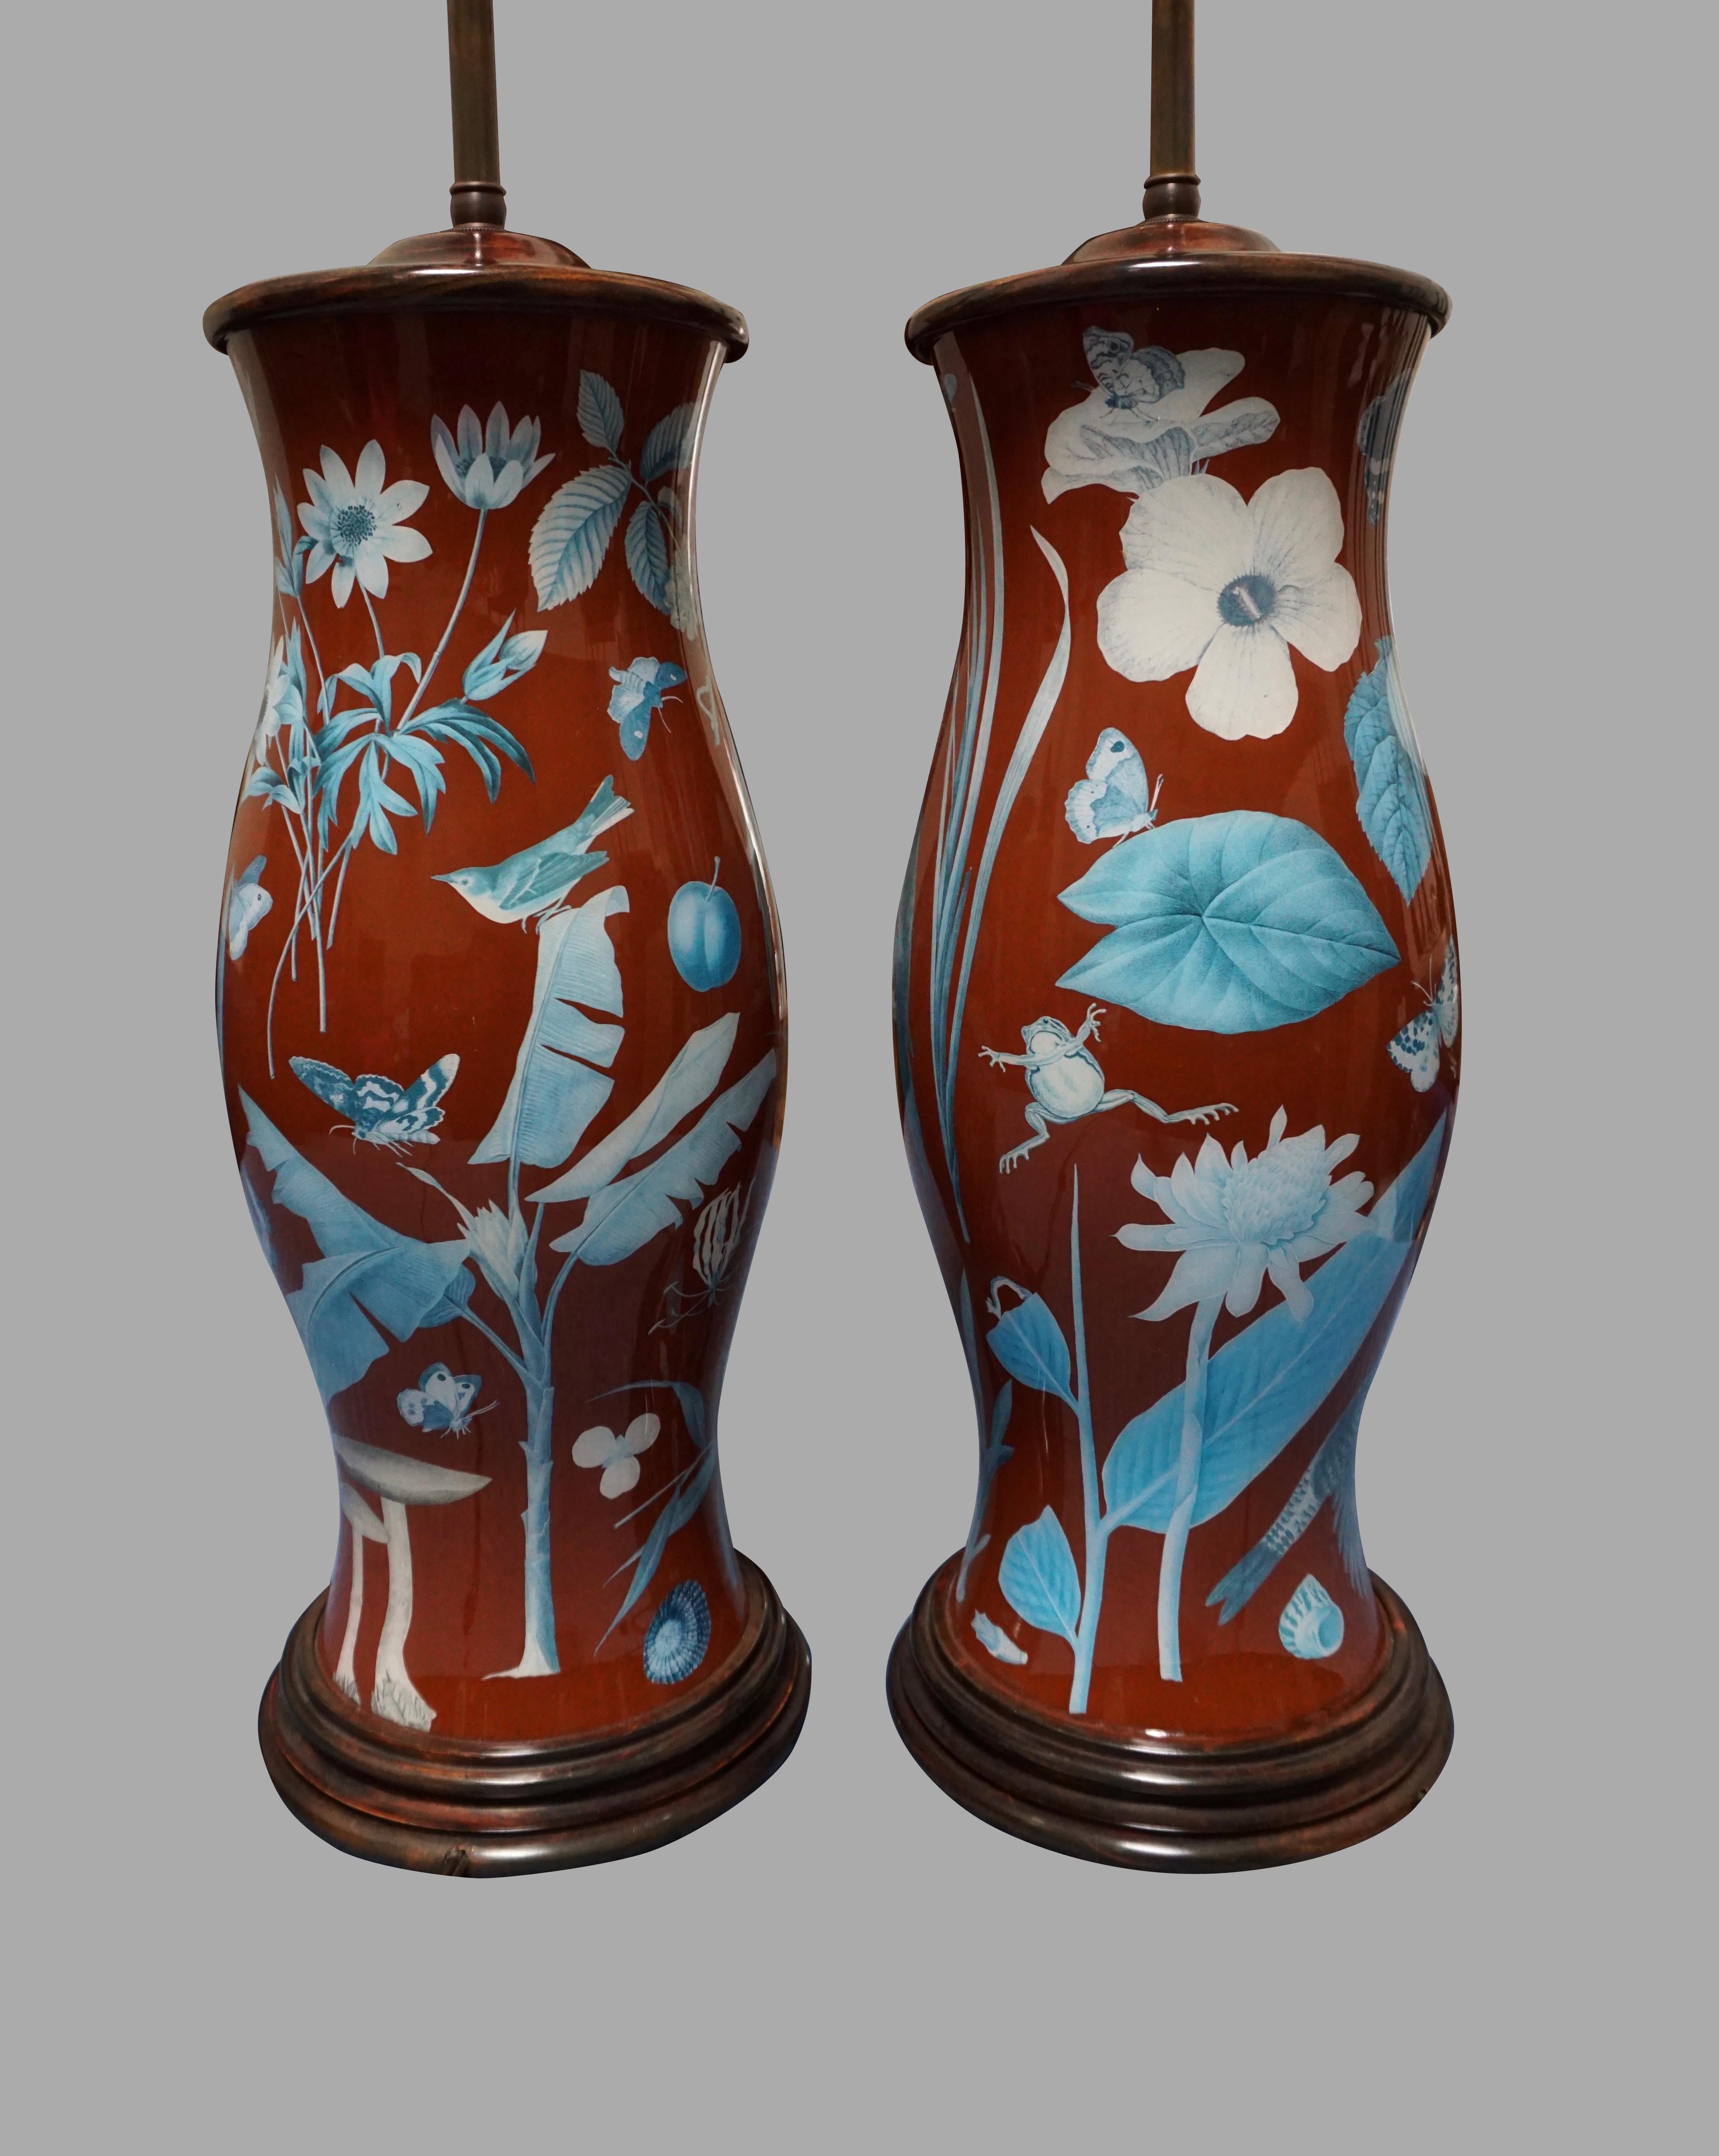 A highly decorative pair of decalcomania baluster form lamps decorated overall with exotic birds, frogs butterflies and plants in colors of red, orange, green and blue mounted with wooden bases and caps.
Wonderful design and substantial scale. No